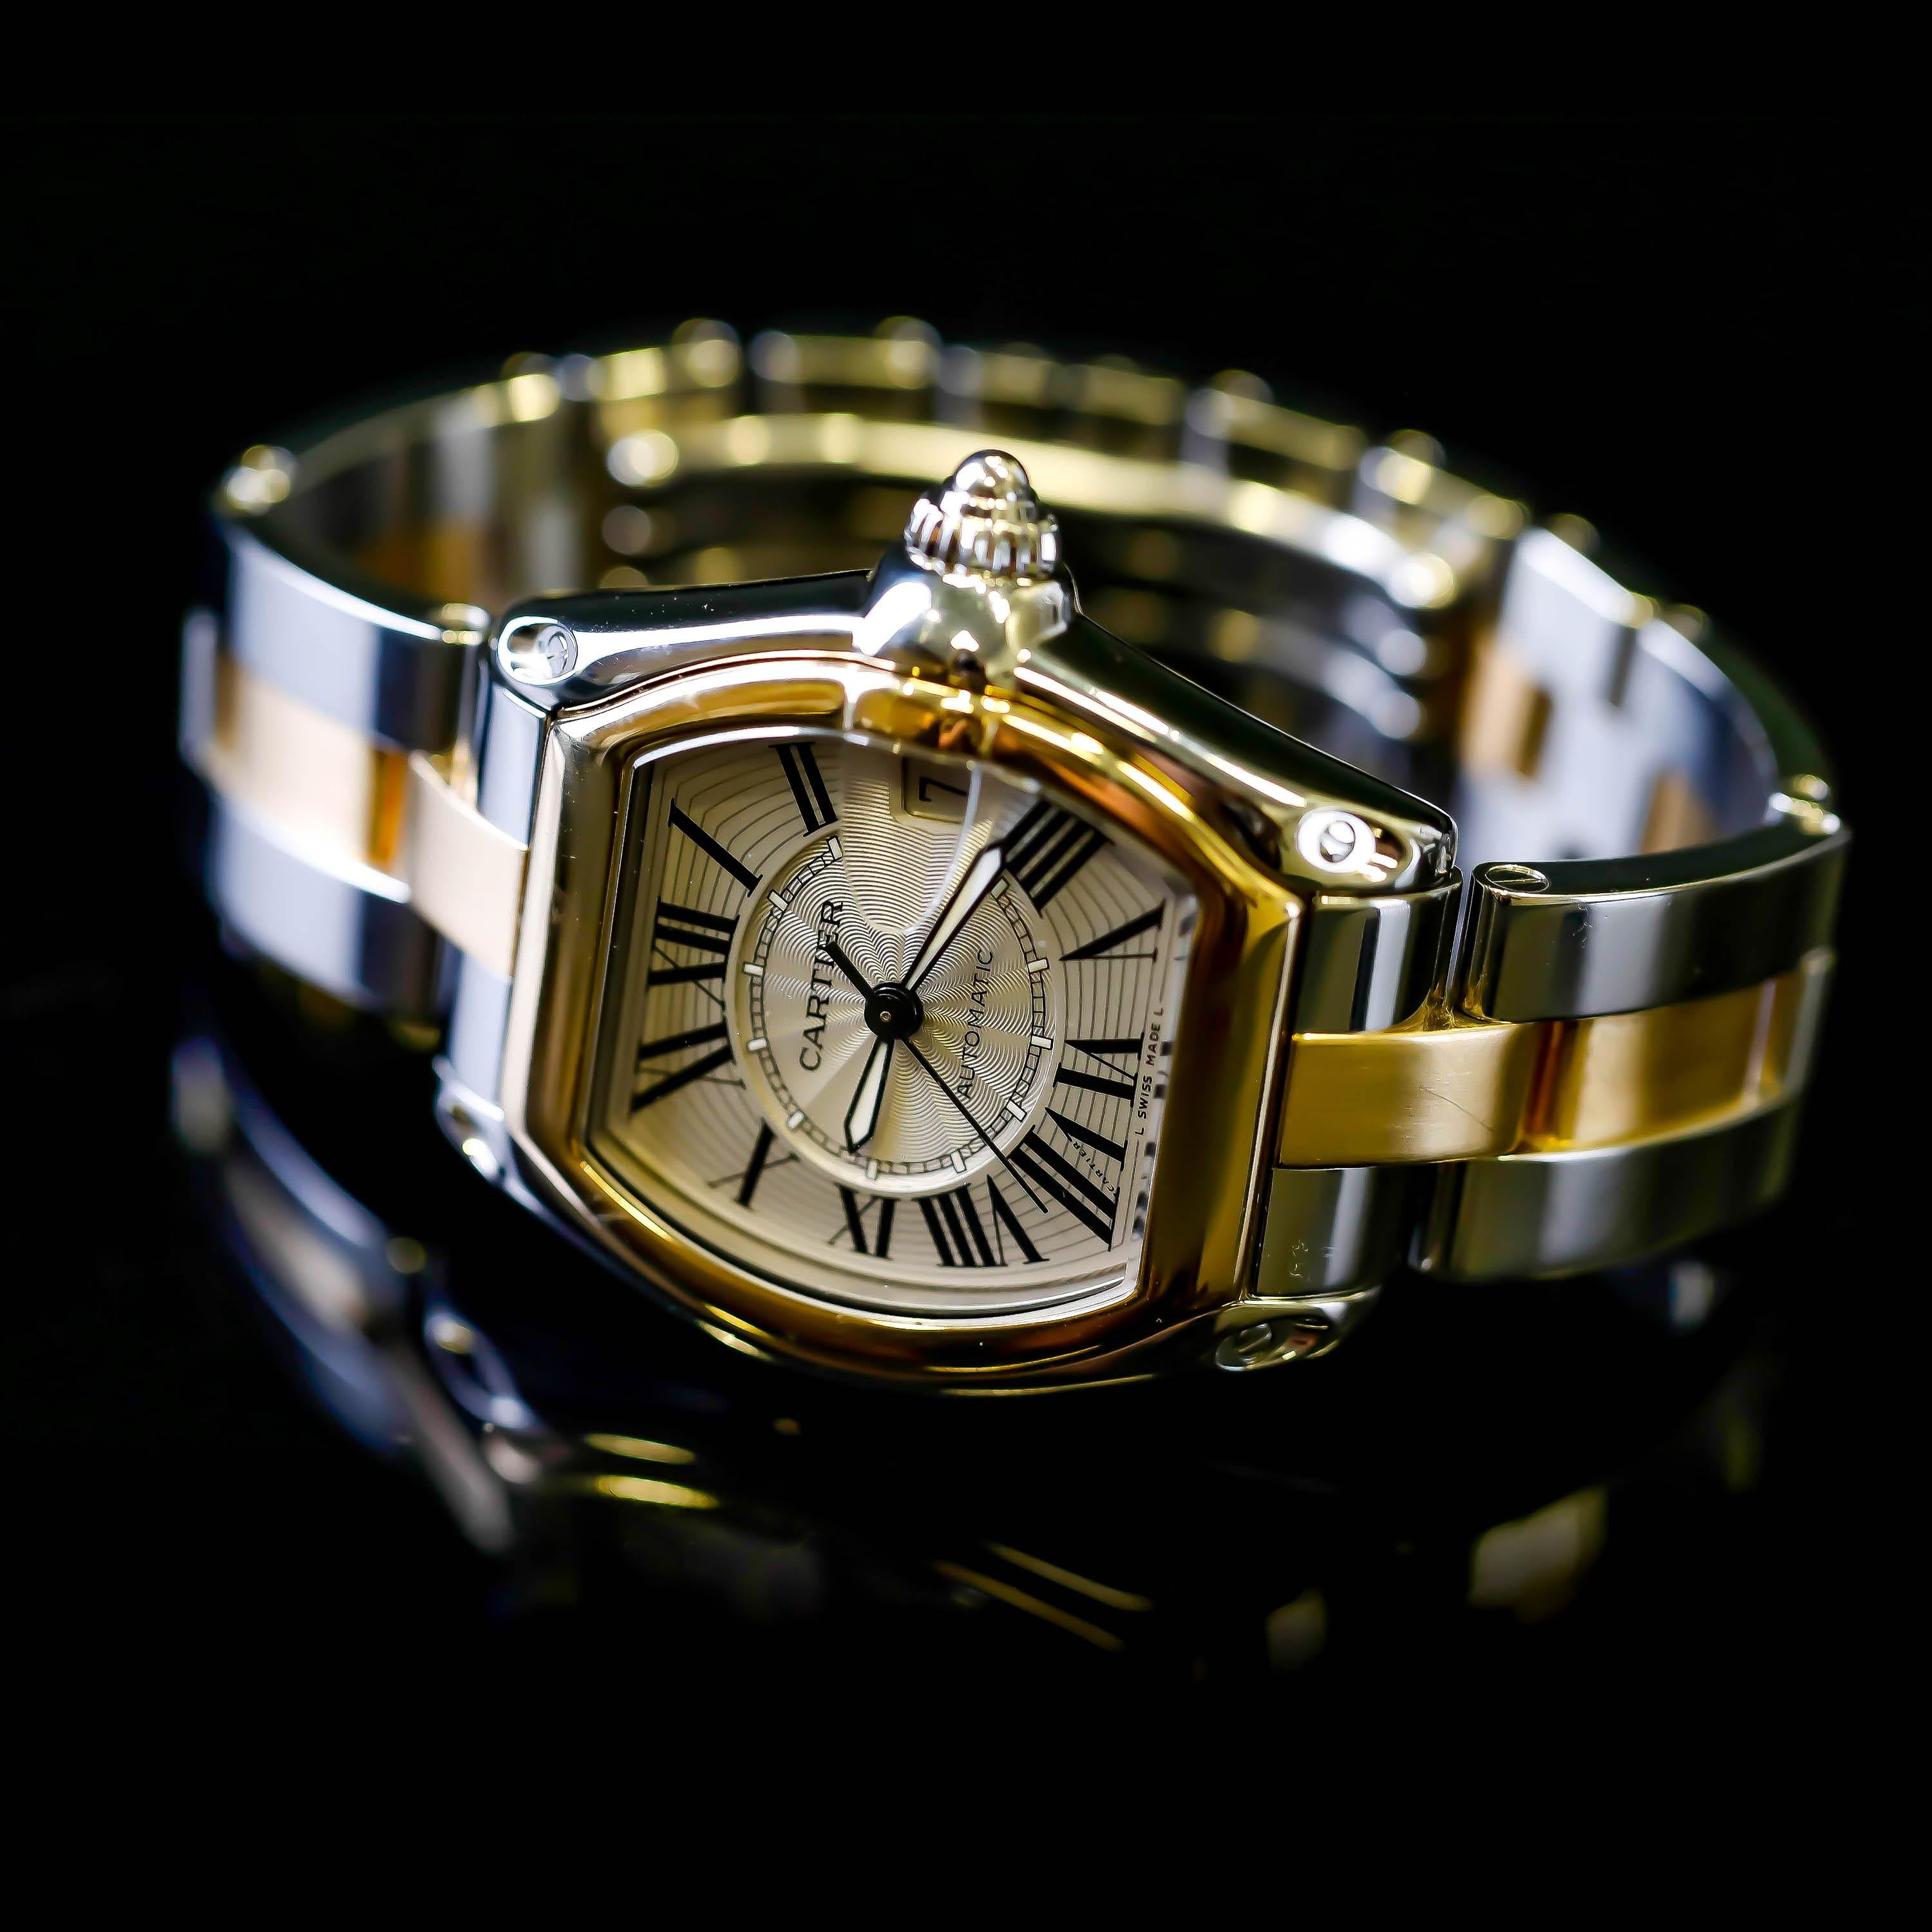 Cartier Two-Tone 18 Karat Gold and Stainless Roadster Large Size Mens Watch 2510 4